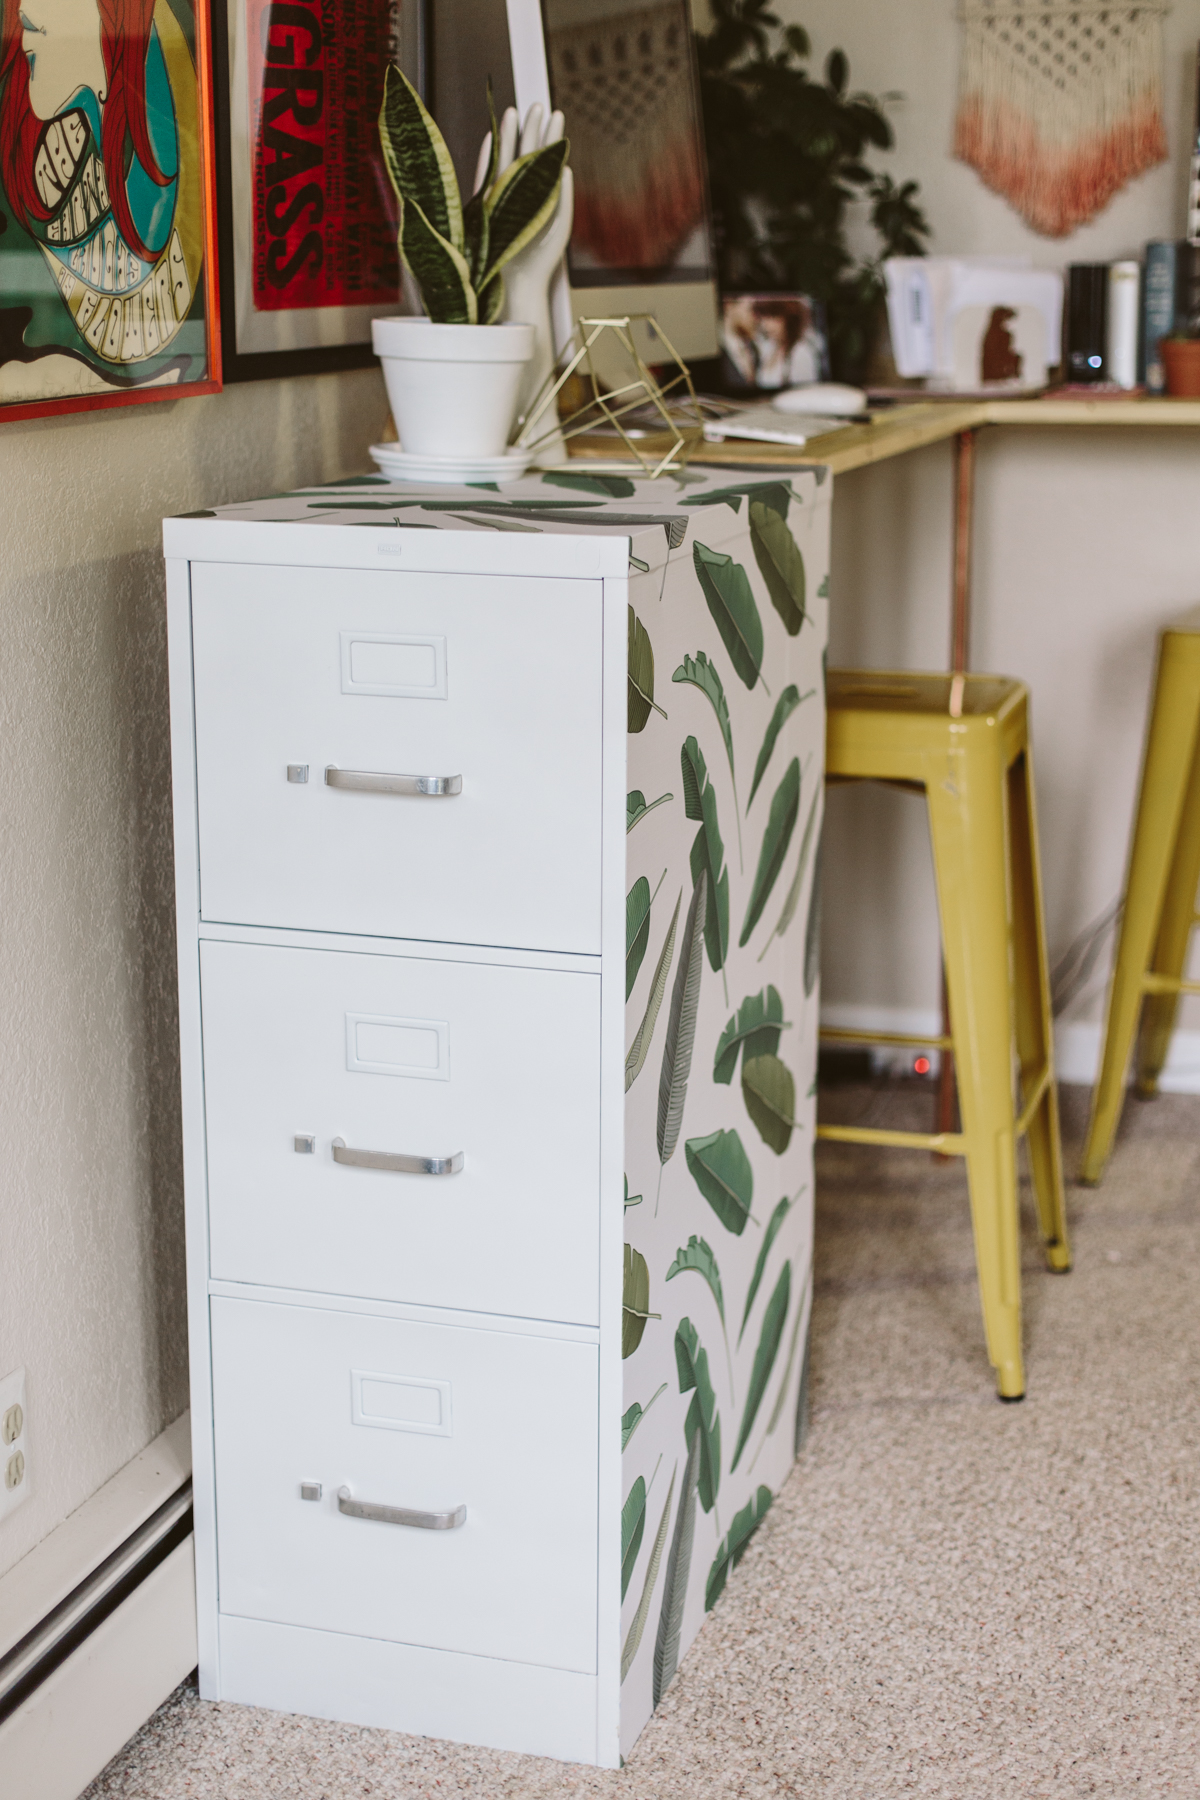 How to Zhuzh Up Filing Cabinets for Stylish Storage  Chair Whimsy